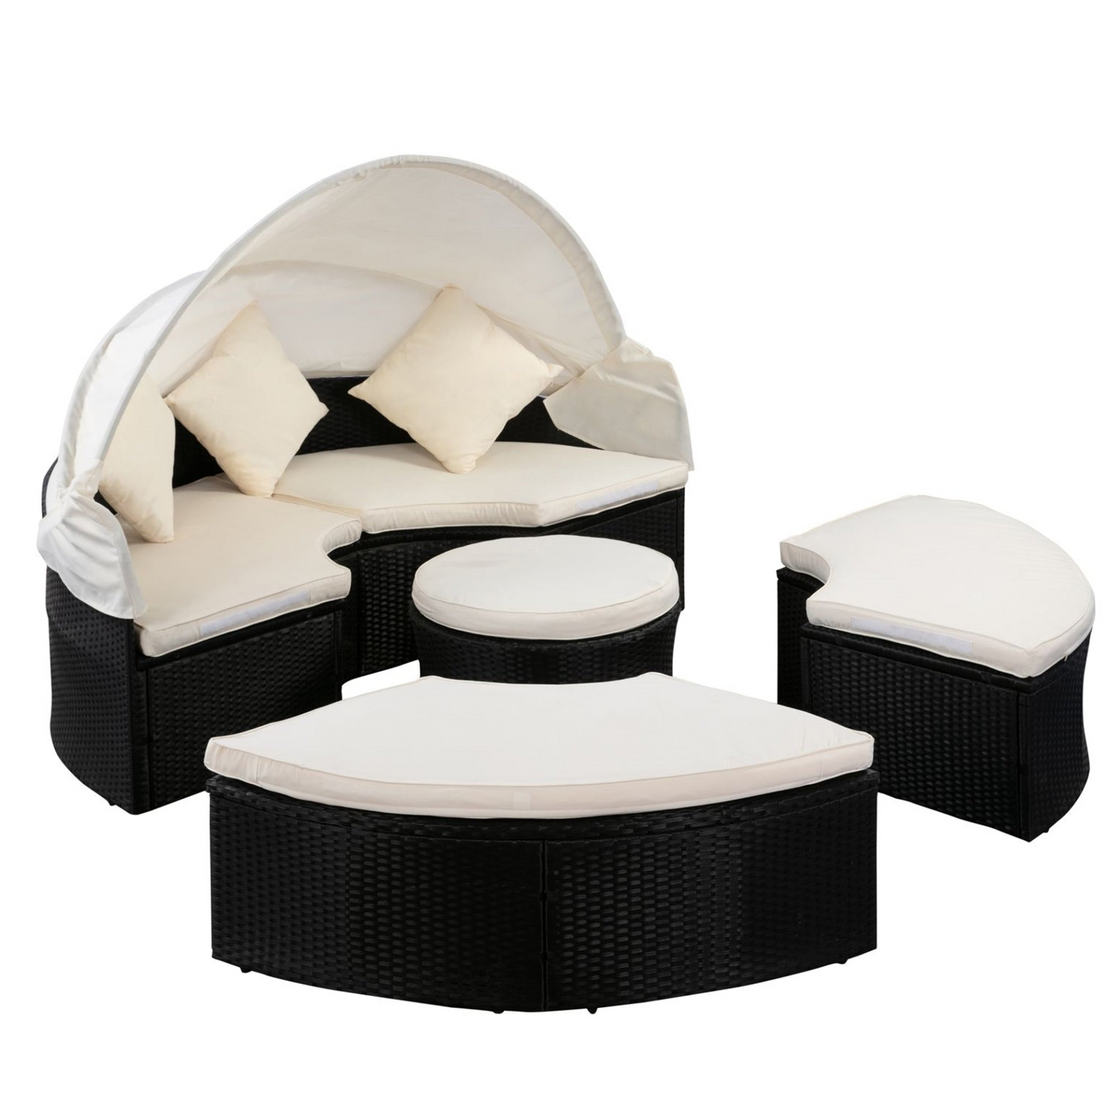 Outdoor Patio Round Daybed with Retractable Canopy | Black Wicker + Creme Cushion